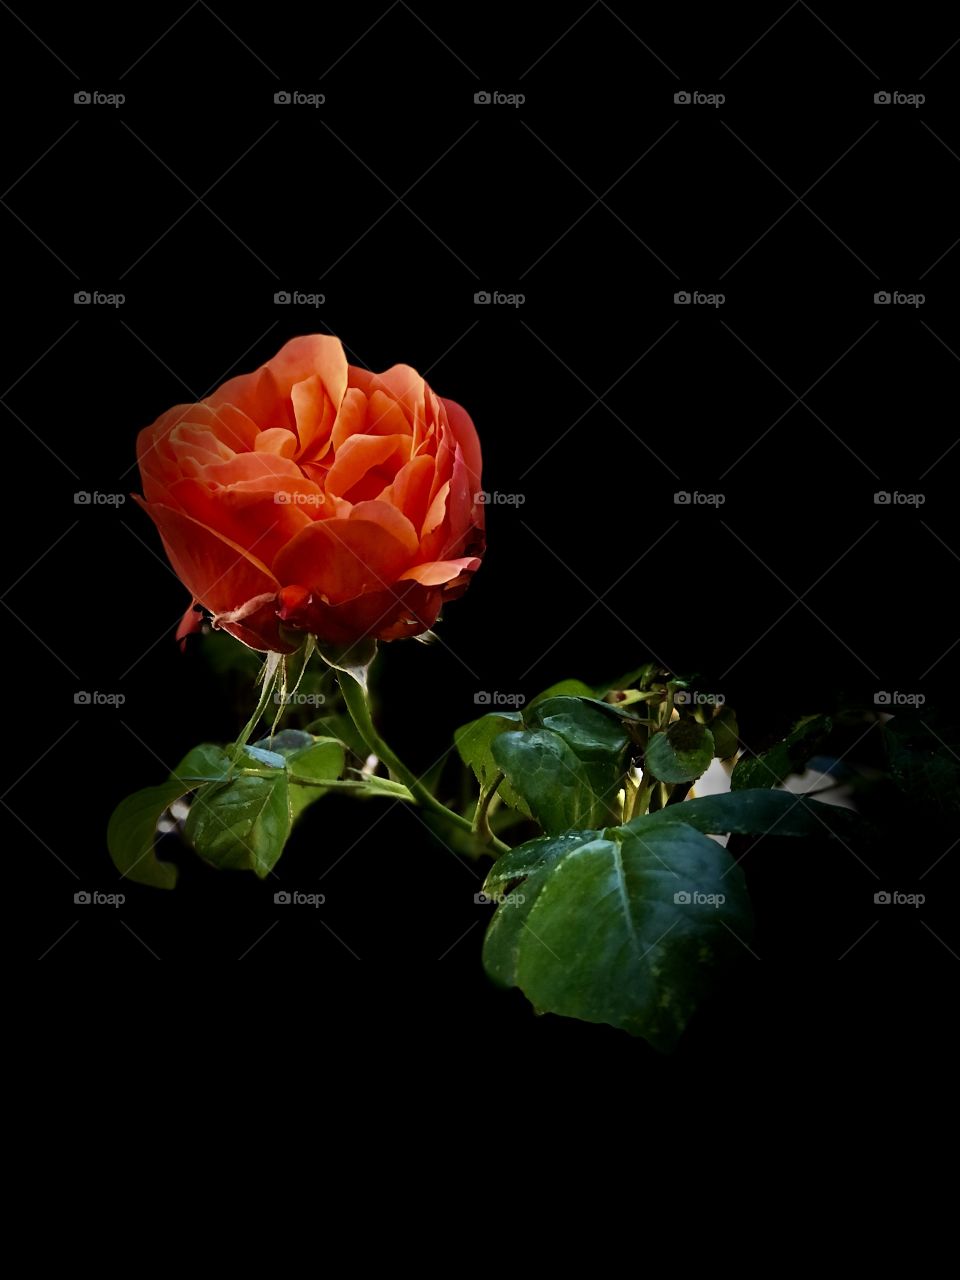 Colourful Coral Orange Rose Close Up Spring Time Photography Darkness Vibrant Colourful 